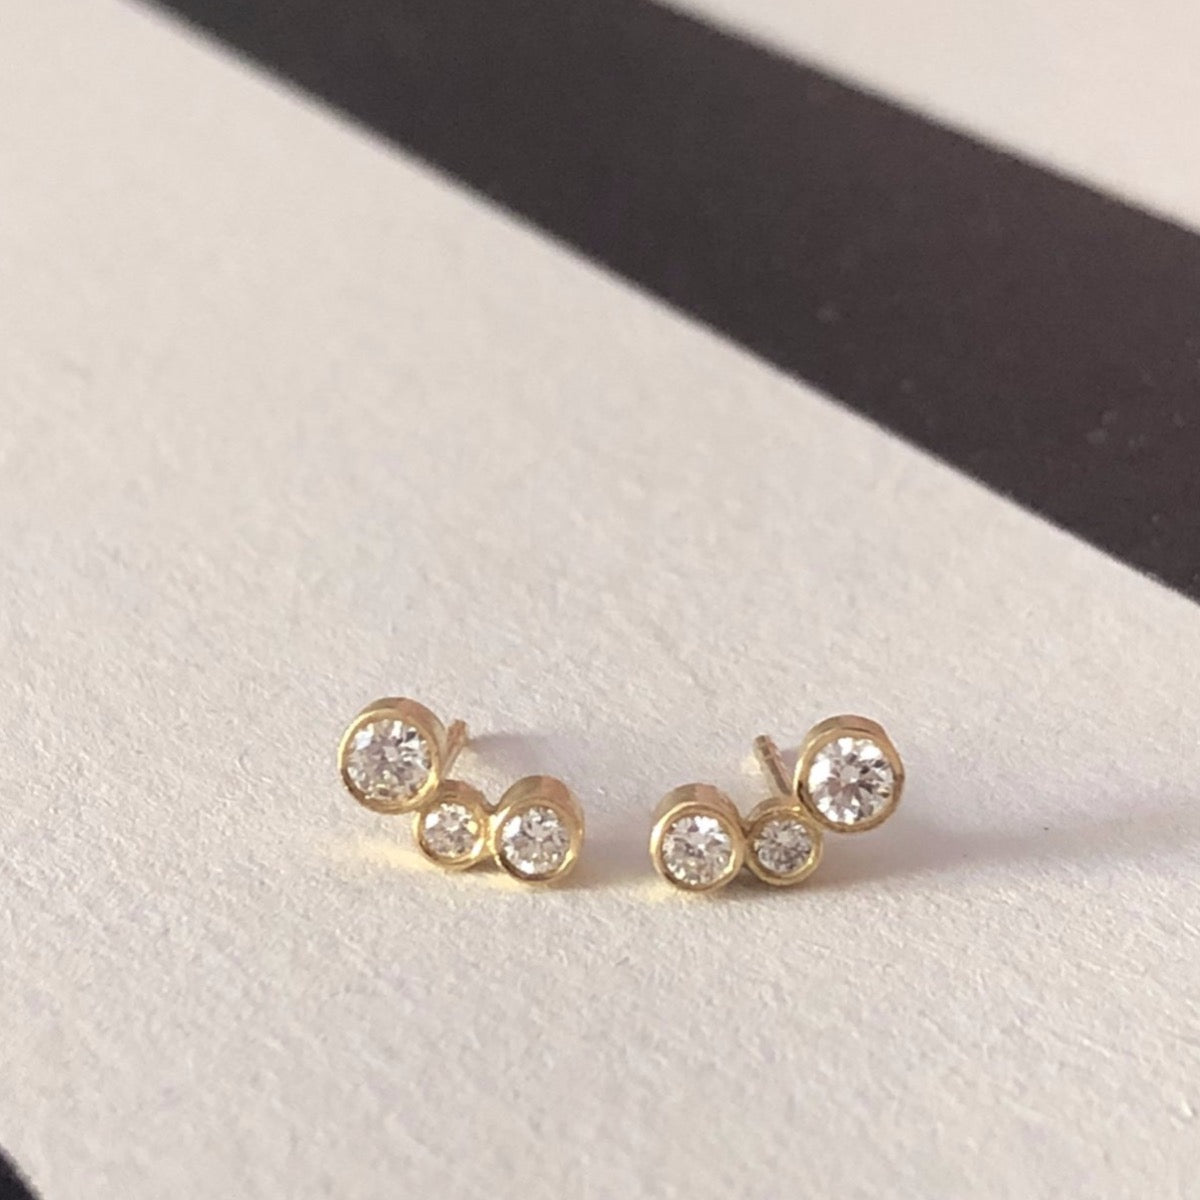 LineUp earrings in 18kt. gold and diamonds